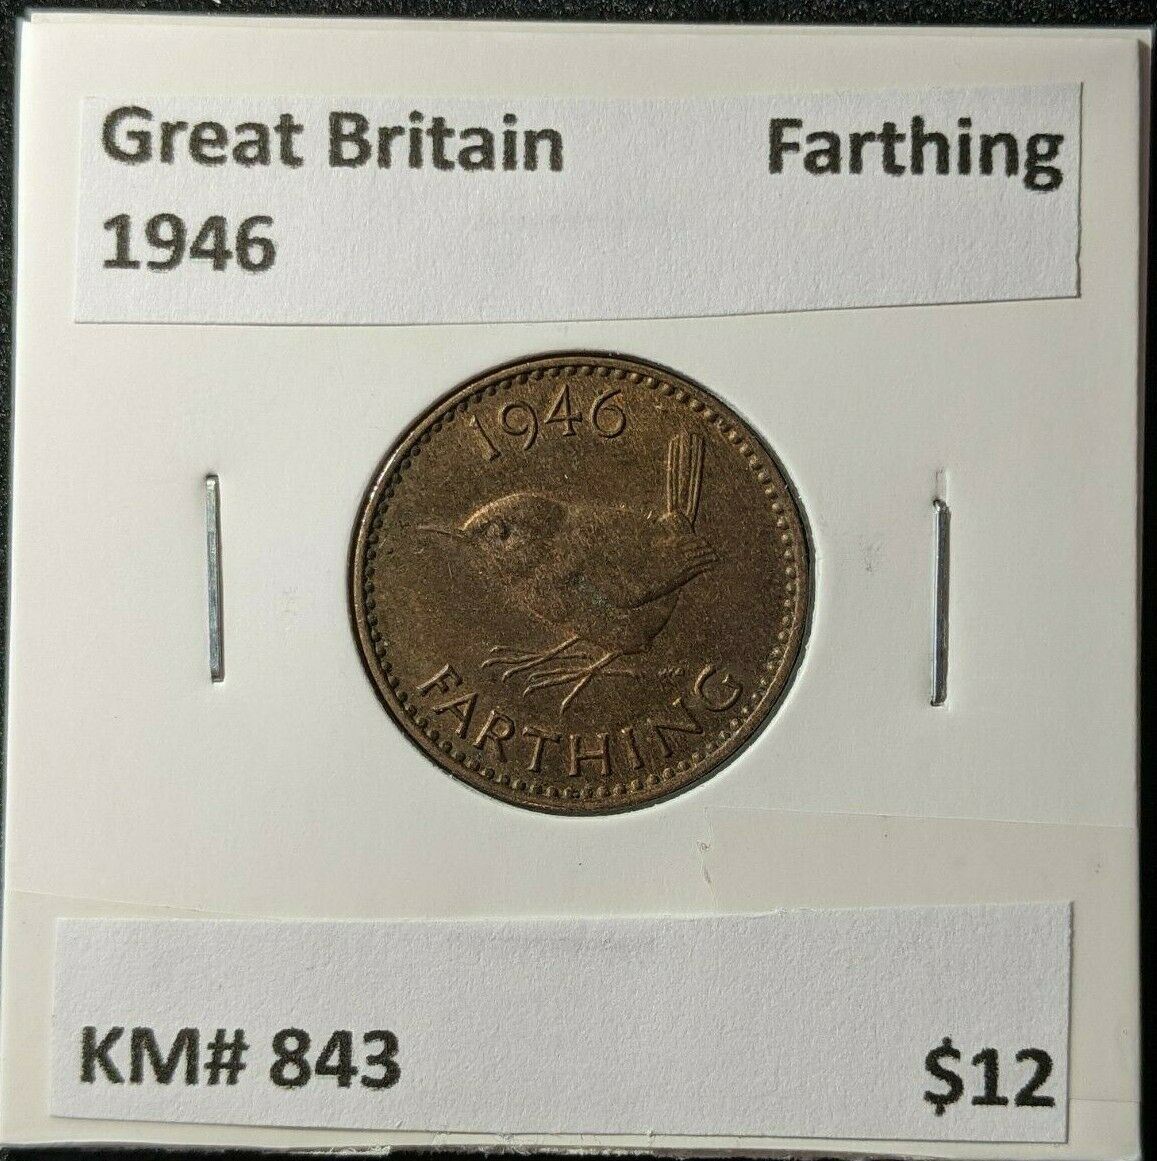 Great Britain 1946 Farthing 1/4dKM# 843 #1871   #16A